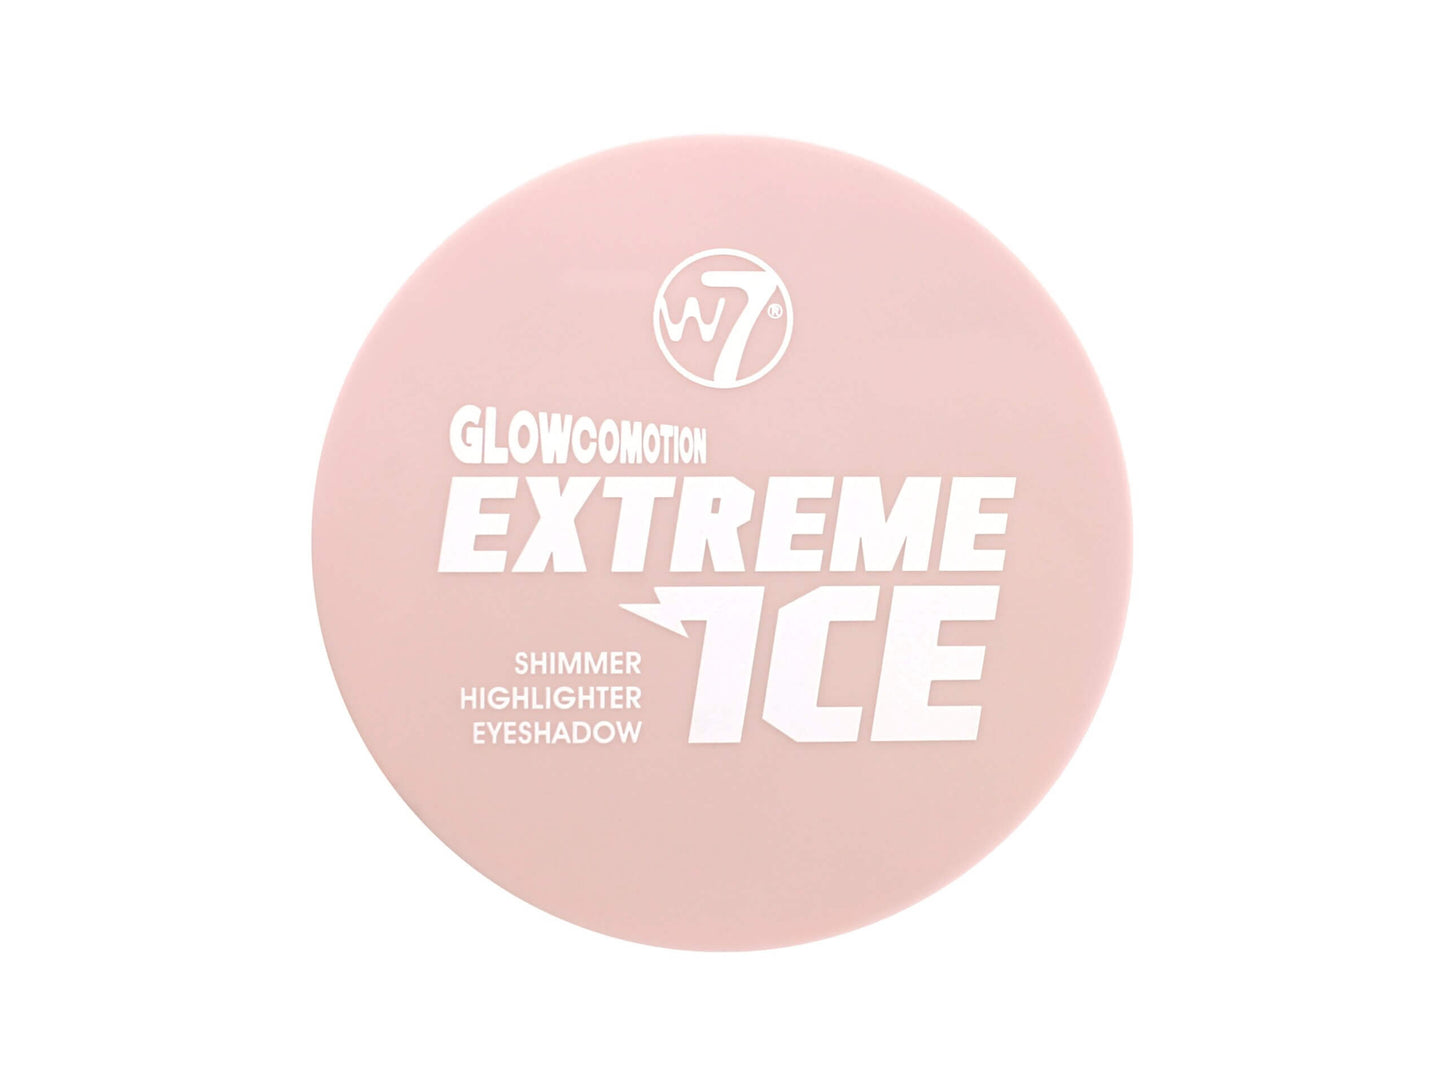 W7 Glowcomotion Extreme Ice Highlighter